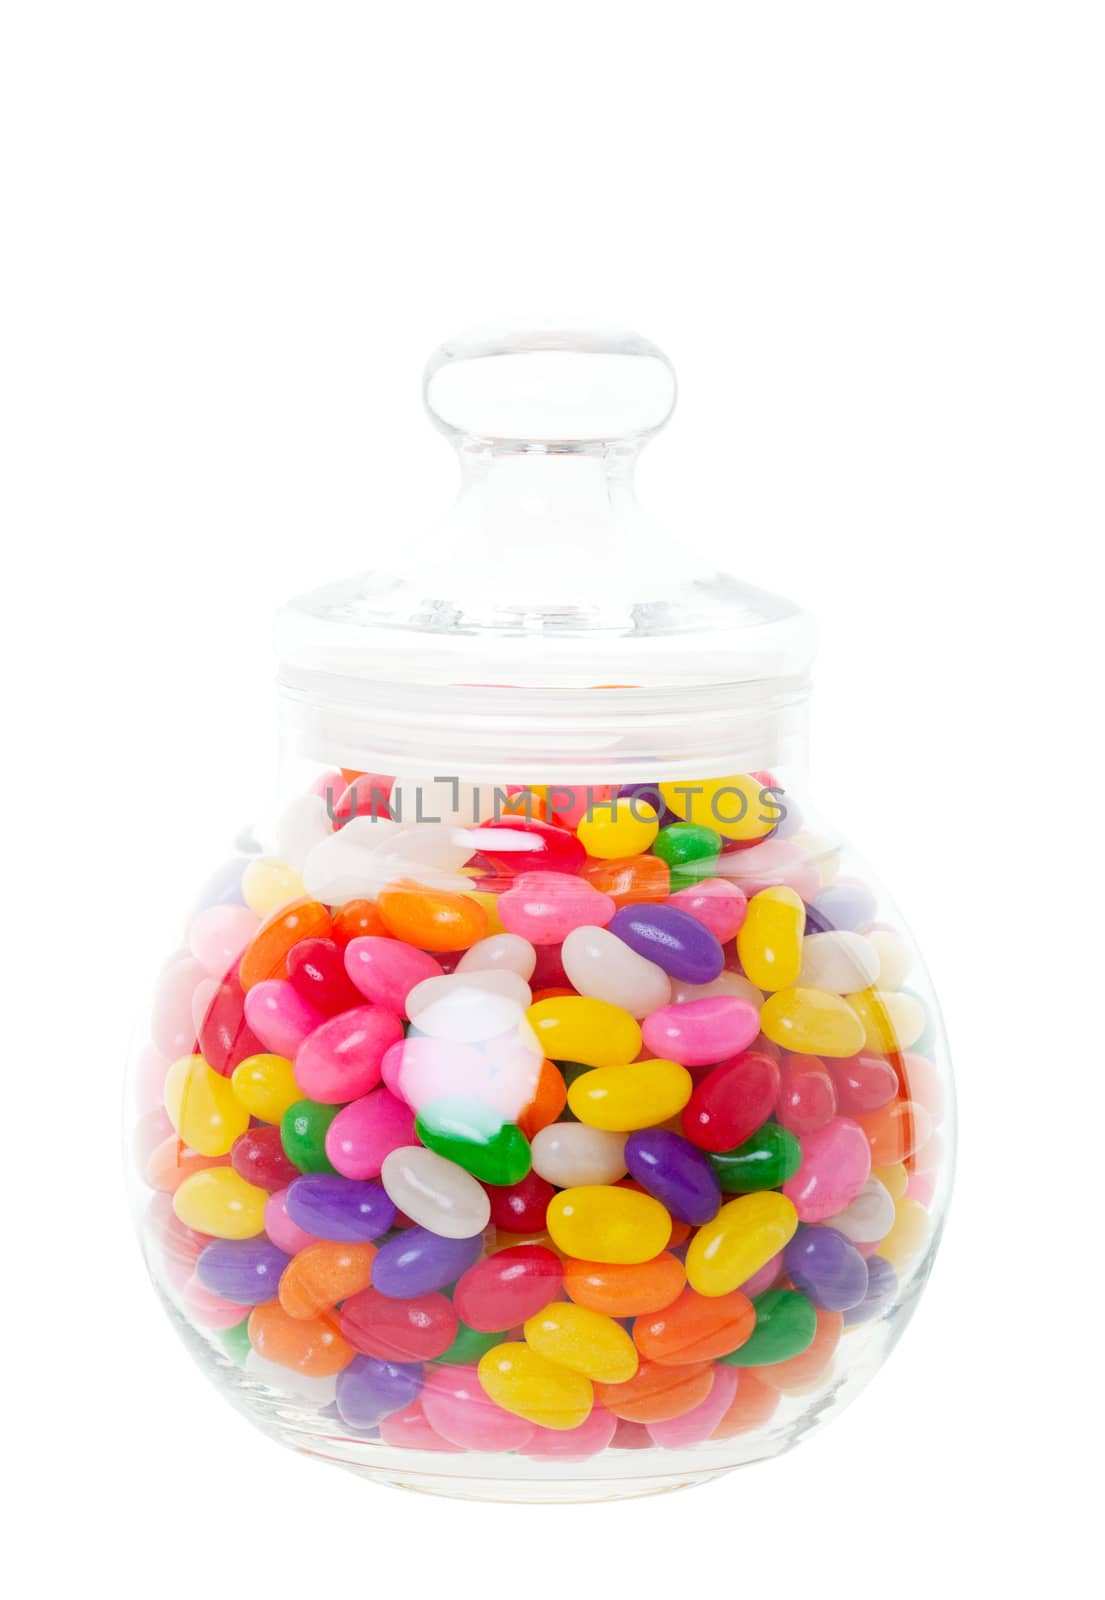 A candy jar full of jelly beans.  Shot on white background.